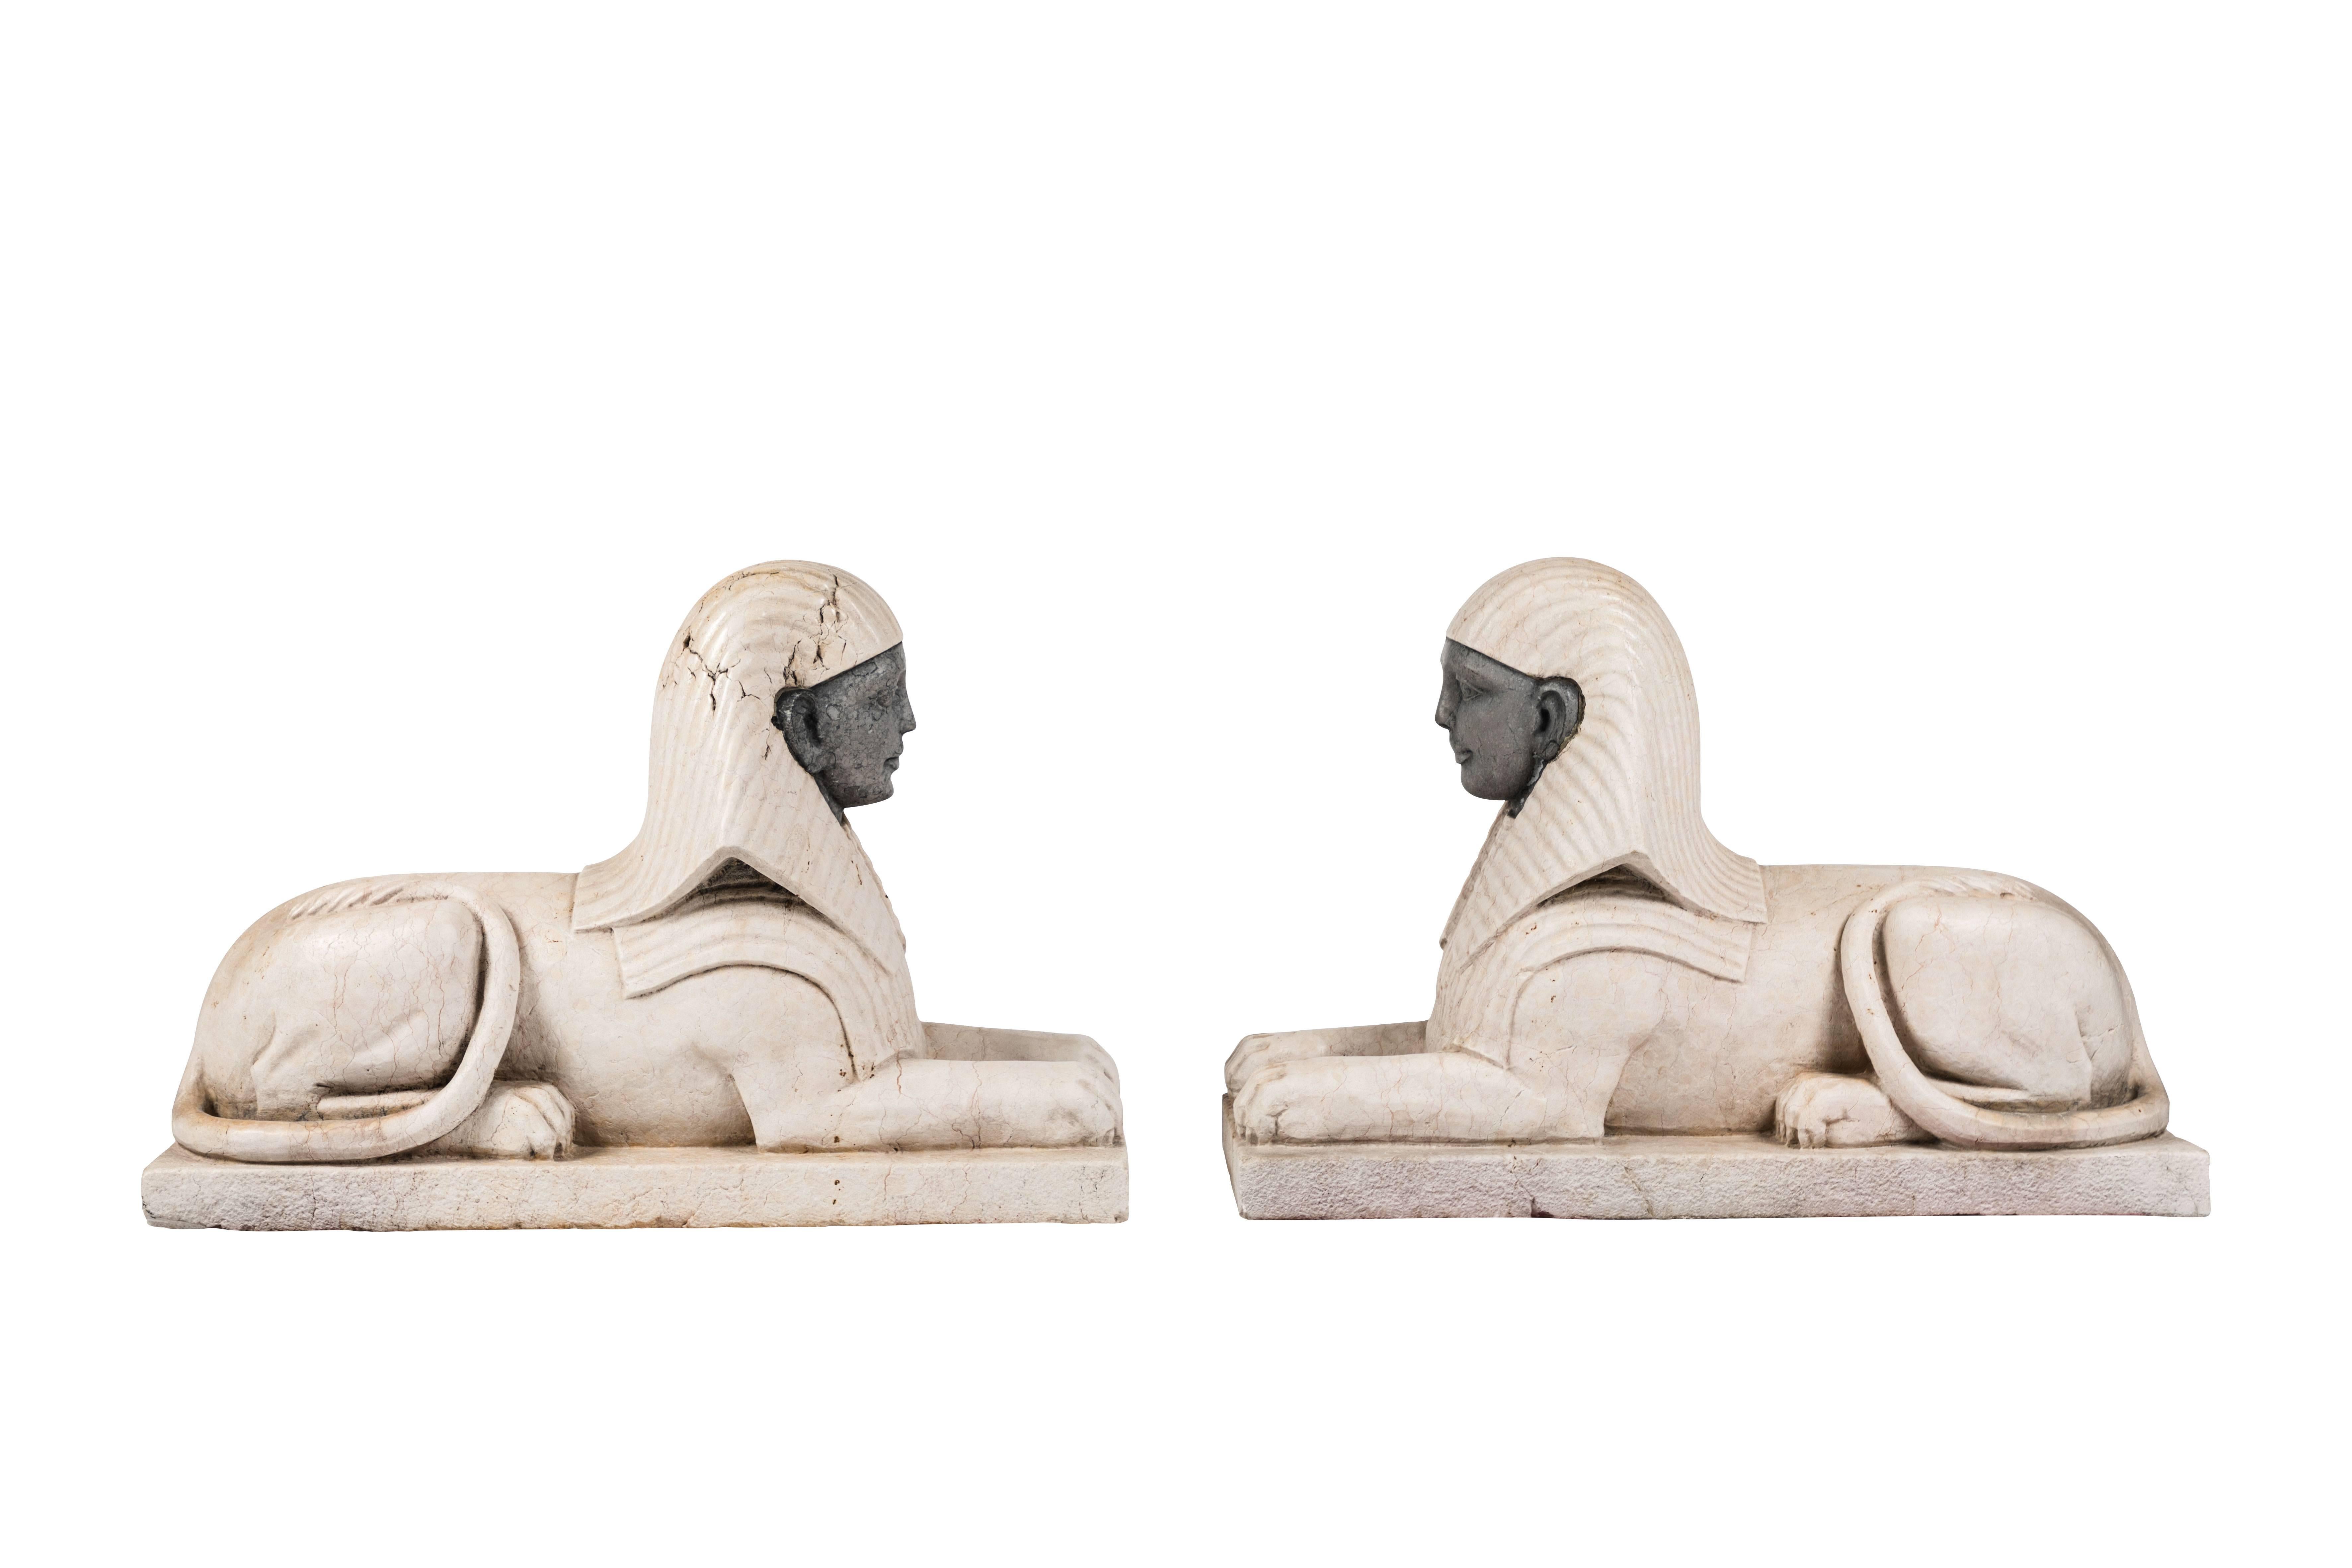 Amazing pair of multi stone Art Deco inspired Sphinxes.  Sitting proudly on a small plinth this classical form takes on a sleek 20th Century vibe.  Crema Marfil marble makes up the overall composition, while the faces are of a black/grey marble. 